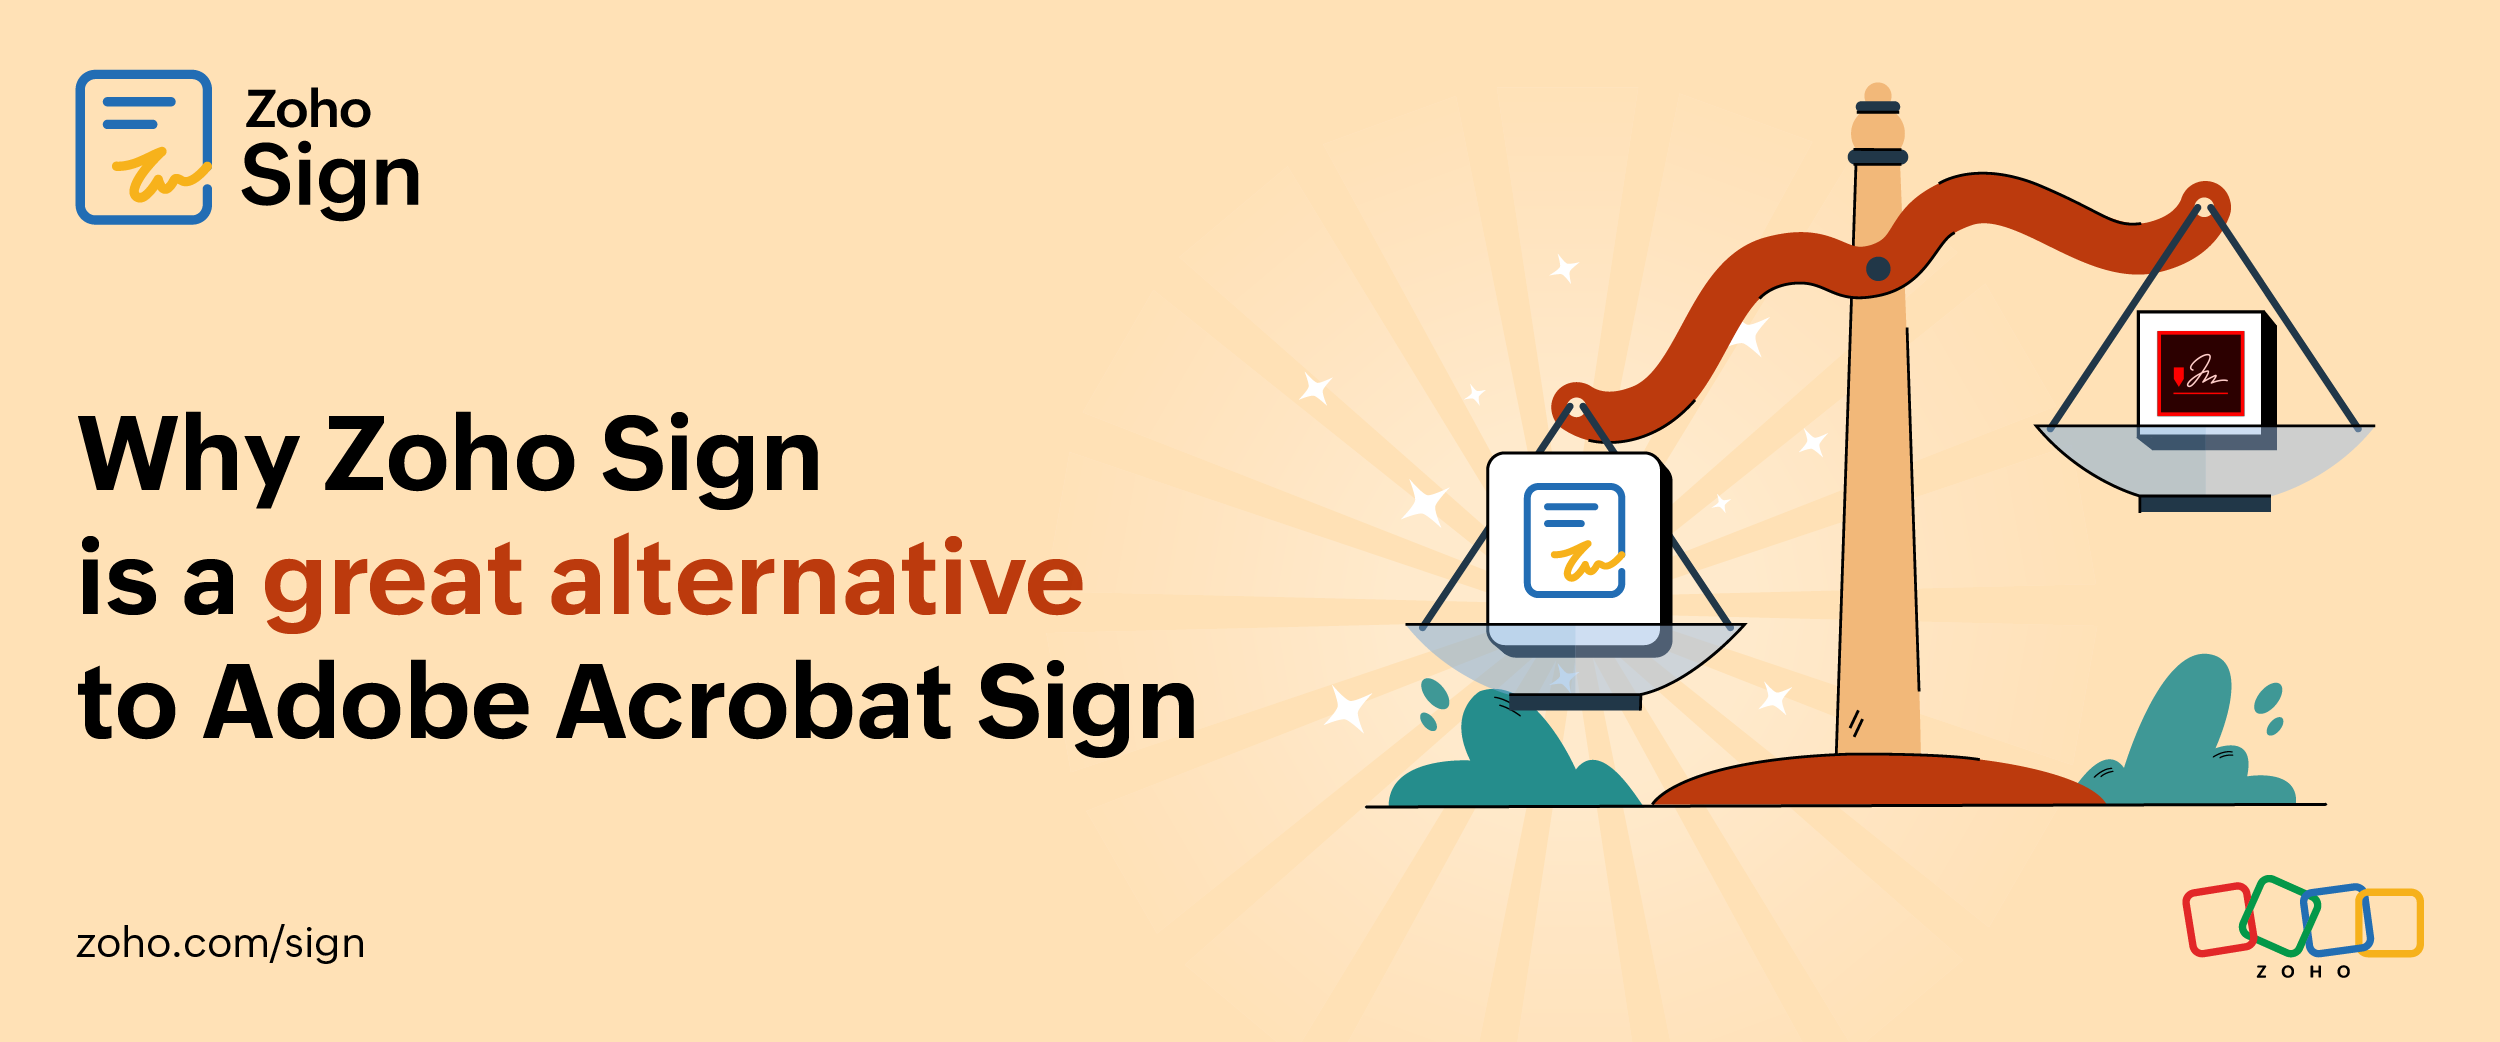 Why Zoho Sign is a great alternative to Adobe Acrobat Sign